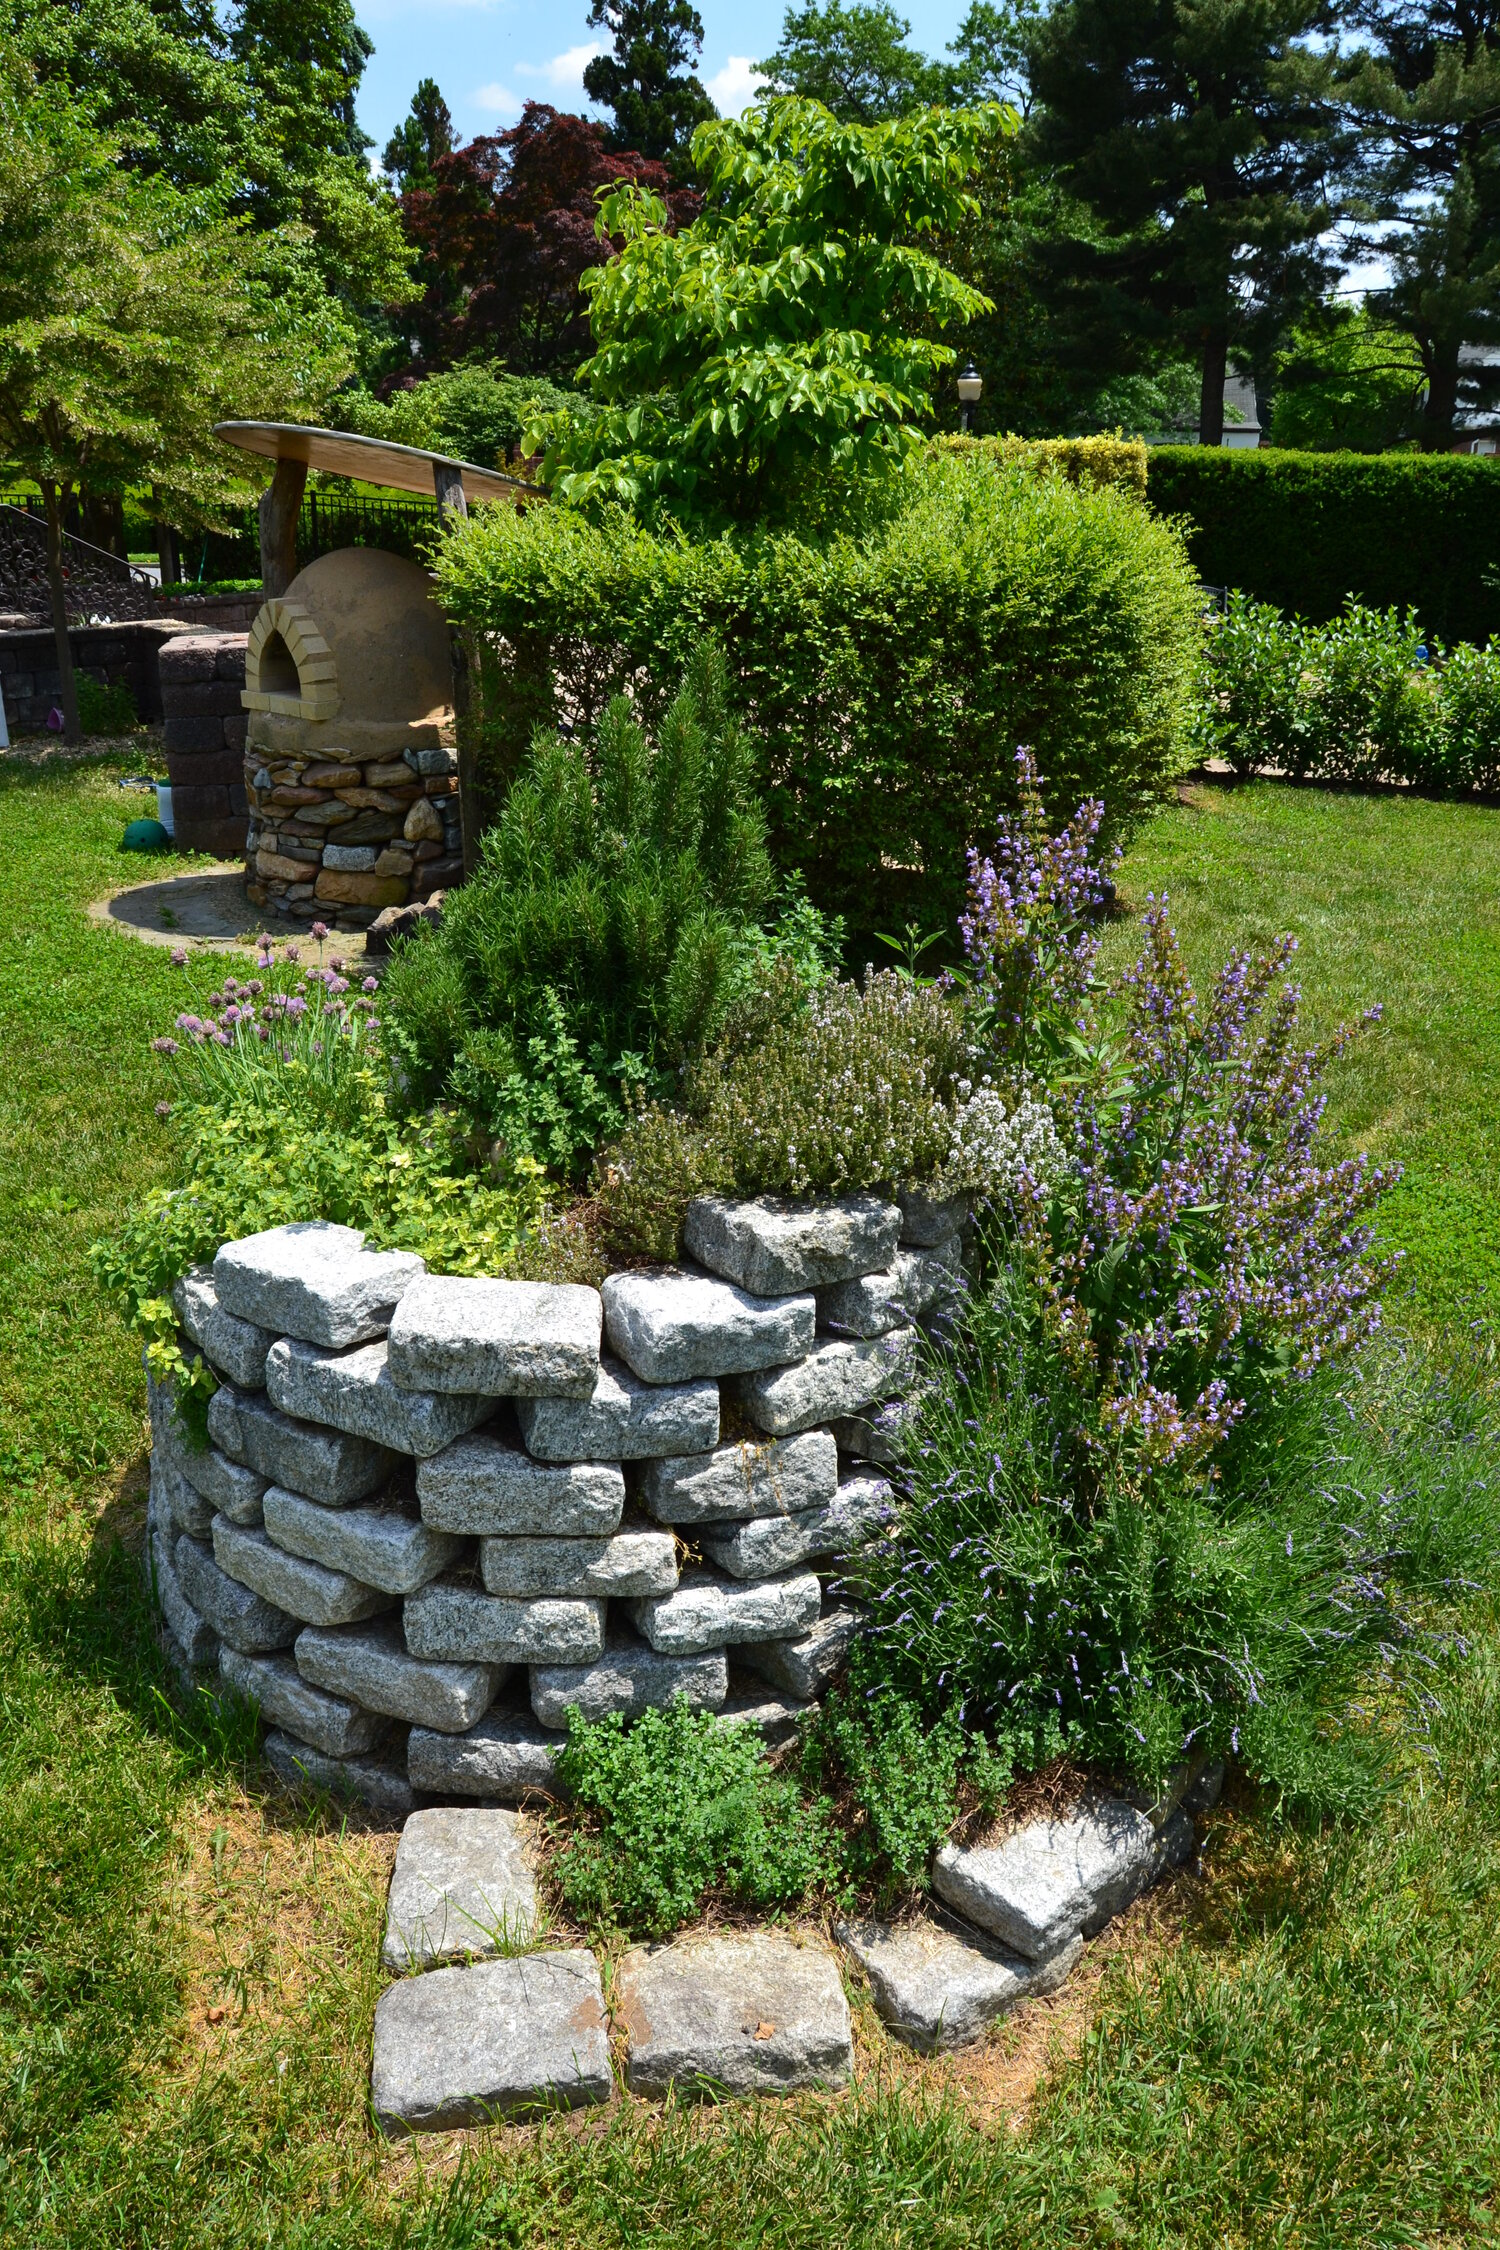 Herb spiral using found field stone – popping with first seasons growth!